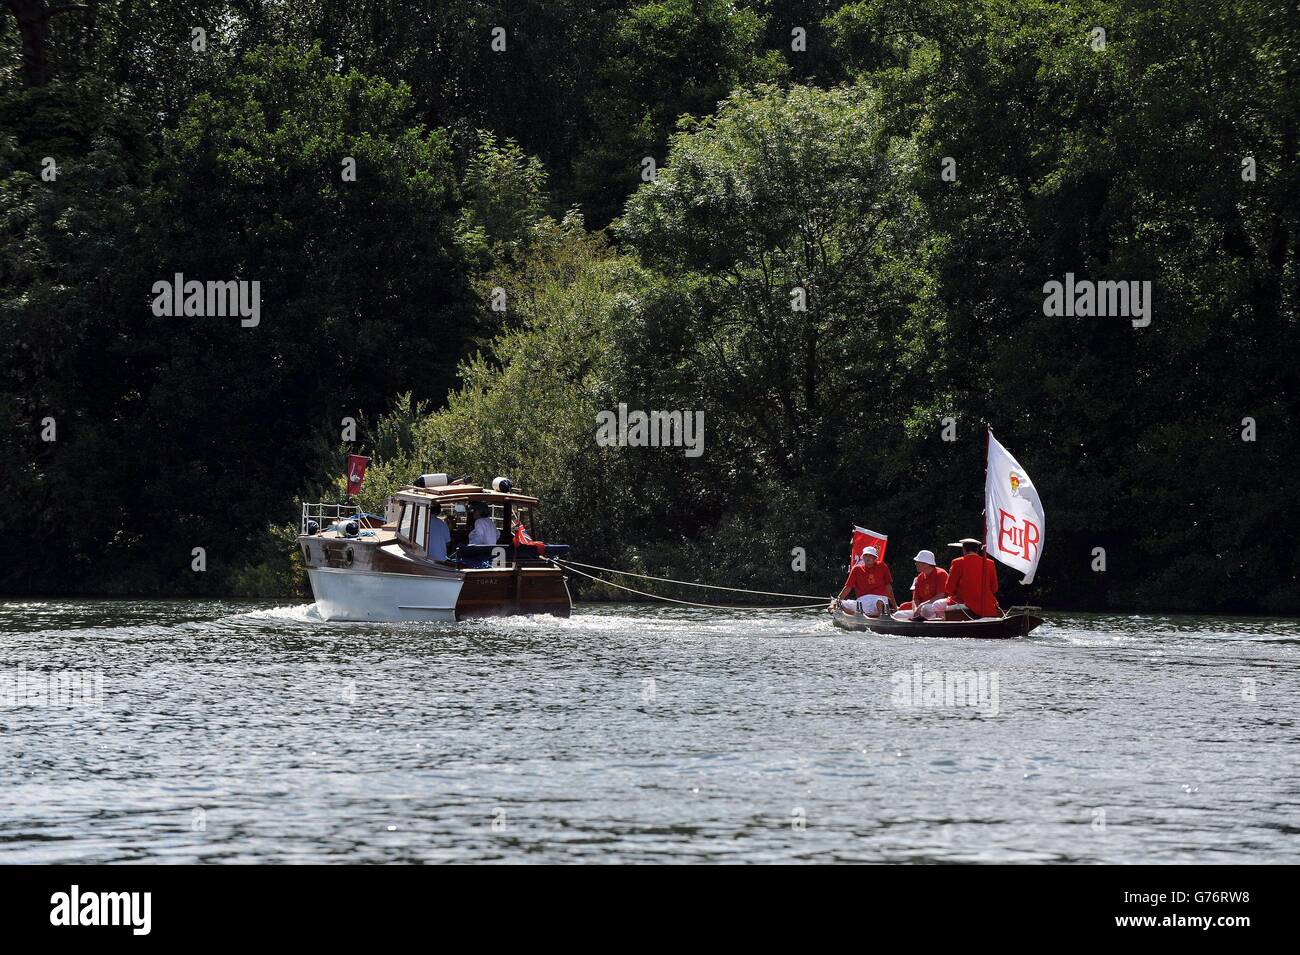 David Barber (far right), The Queen's Swan Marker travels in a Thames skiff during Swan Upping, the annual census of the swan population on the River Thames. Stock Photo